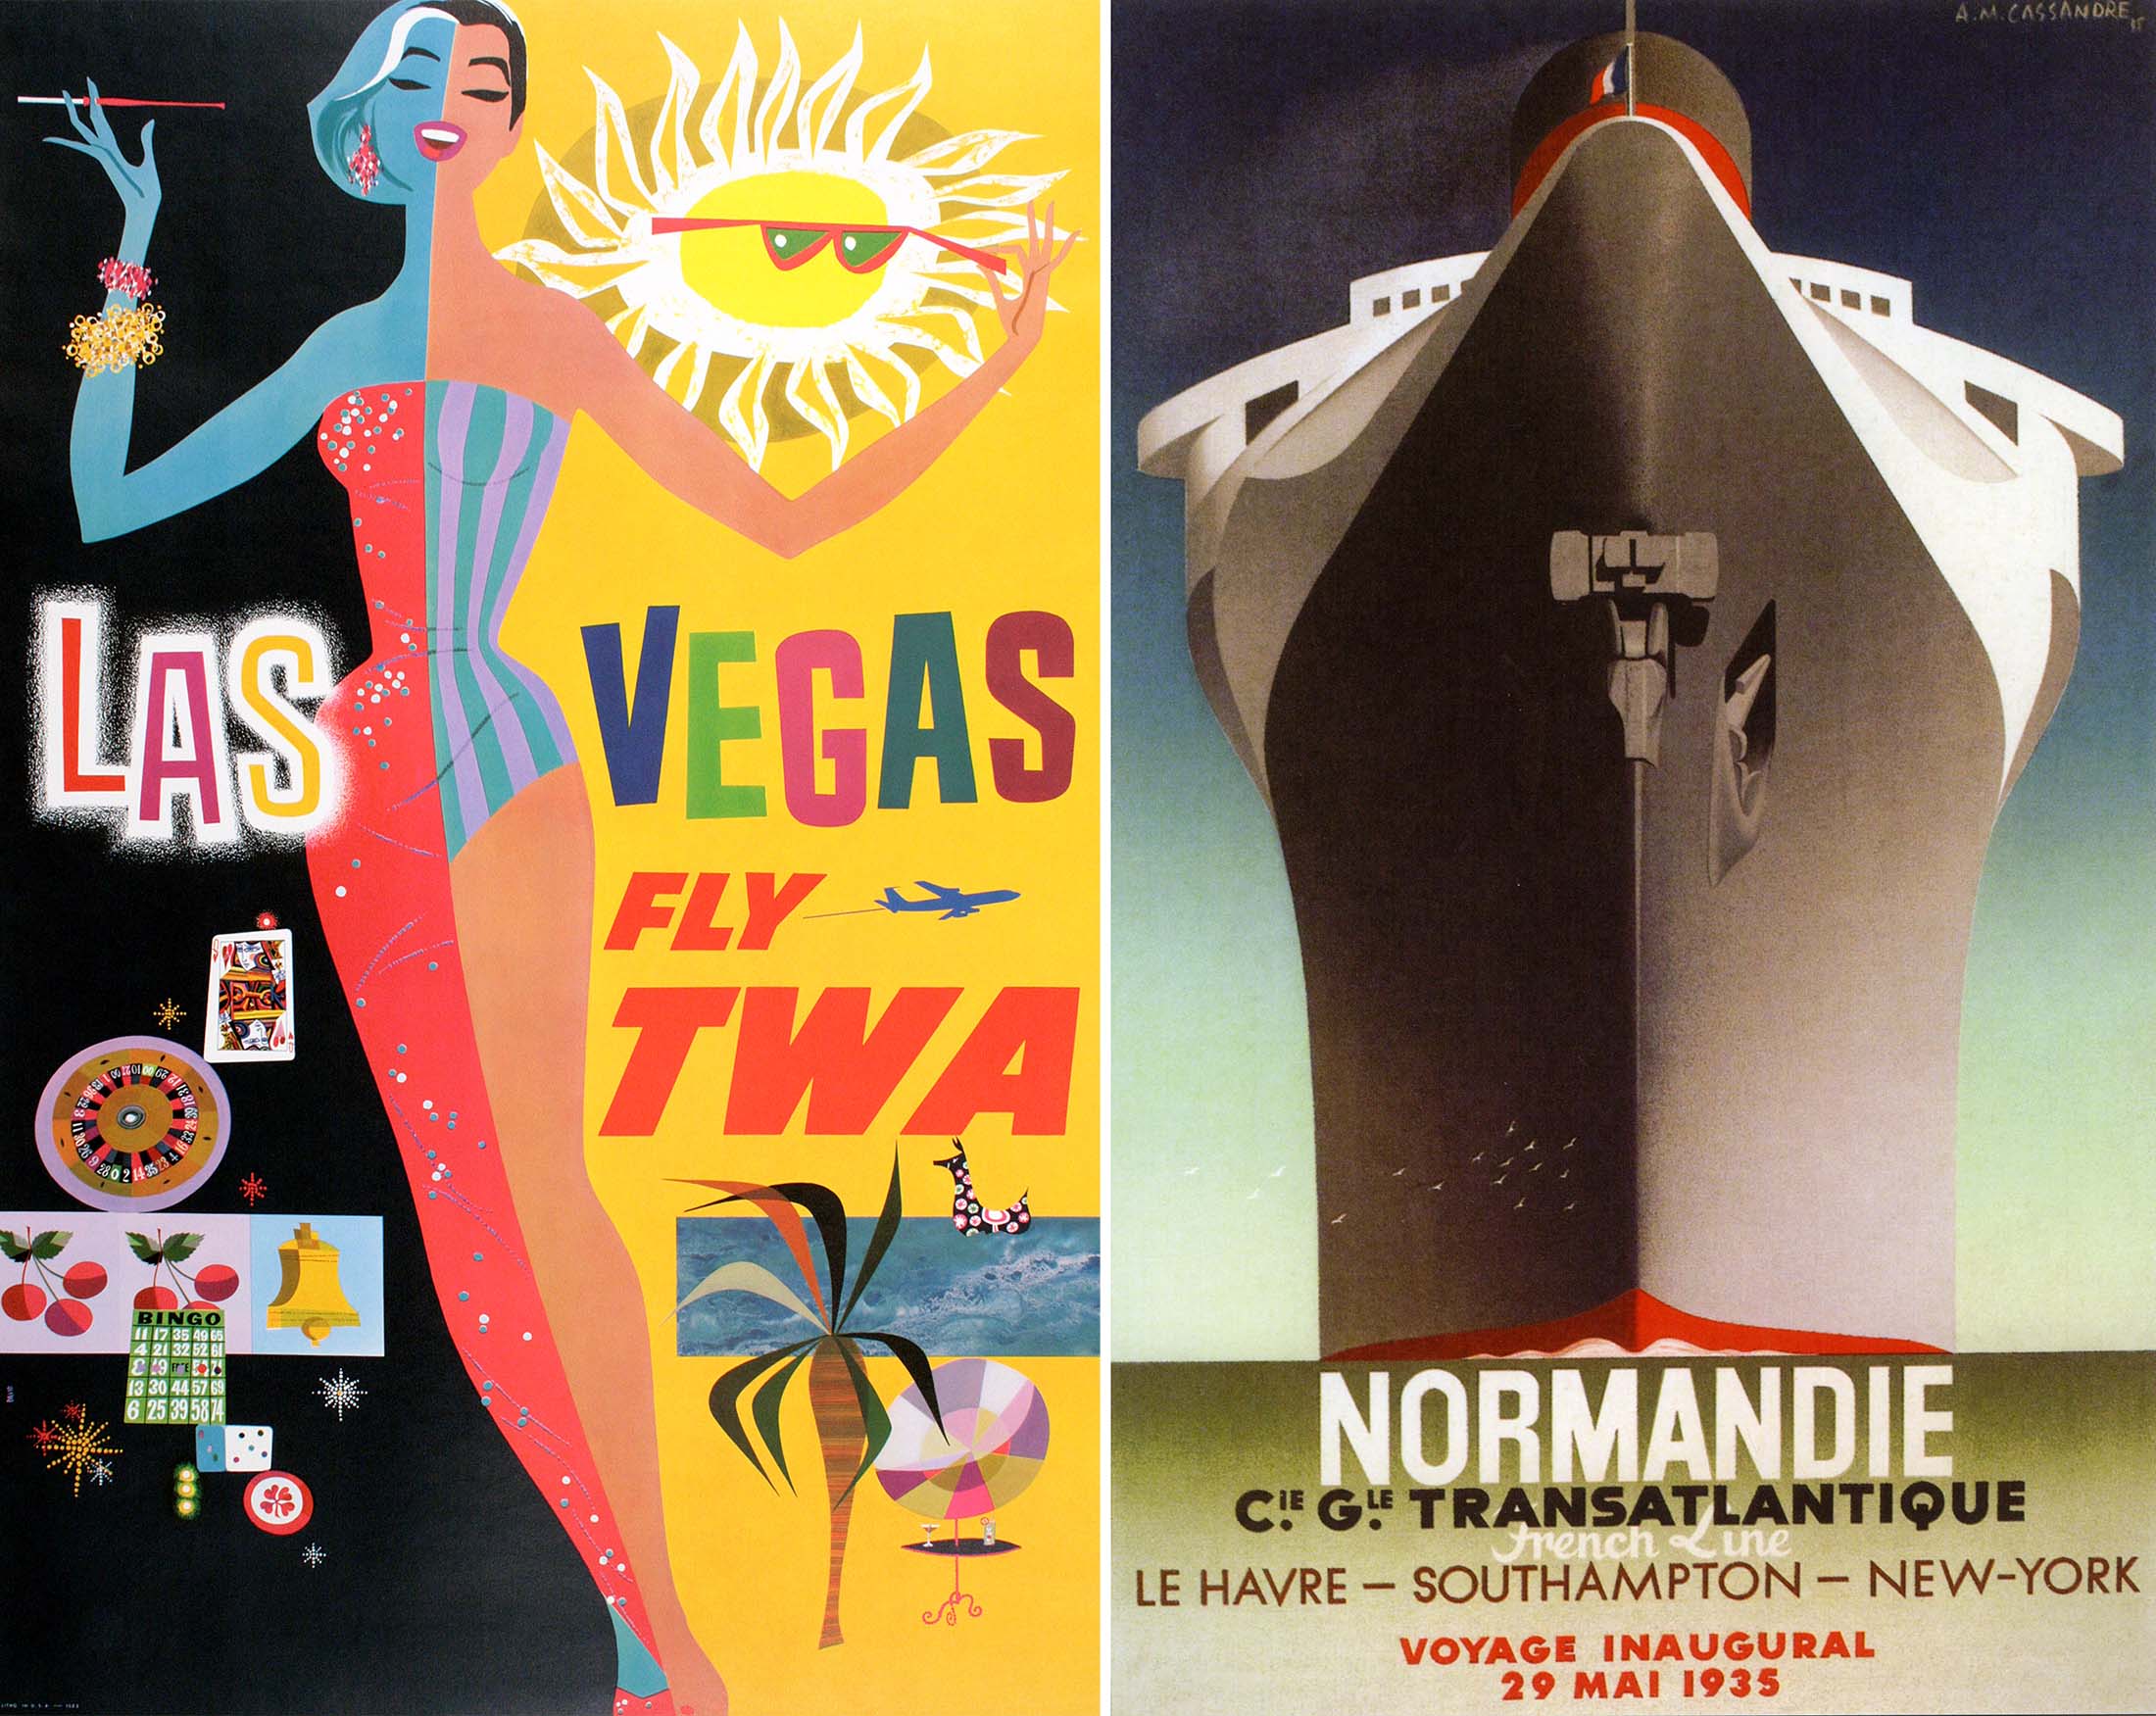 What You Should Know Before Buying Vintage Posters - Invaluable